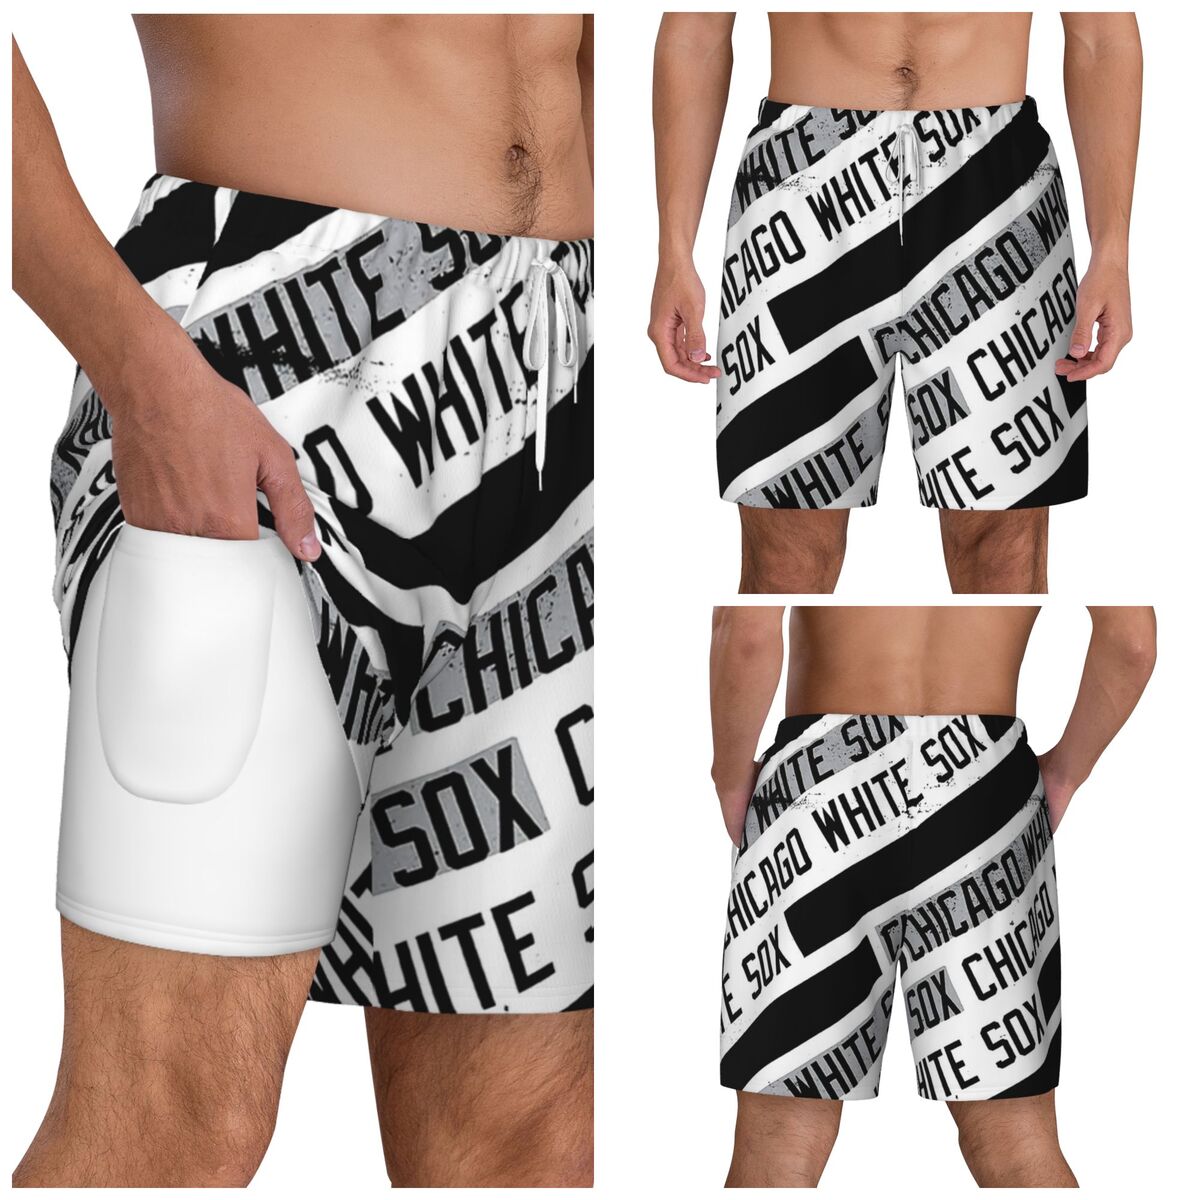 Chicago White Sox Text Pattern Men's Swim Trunks with Compression Liner